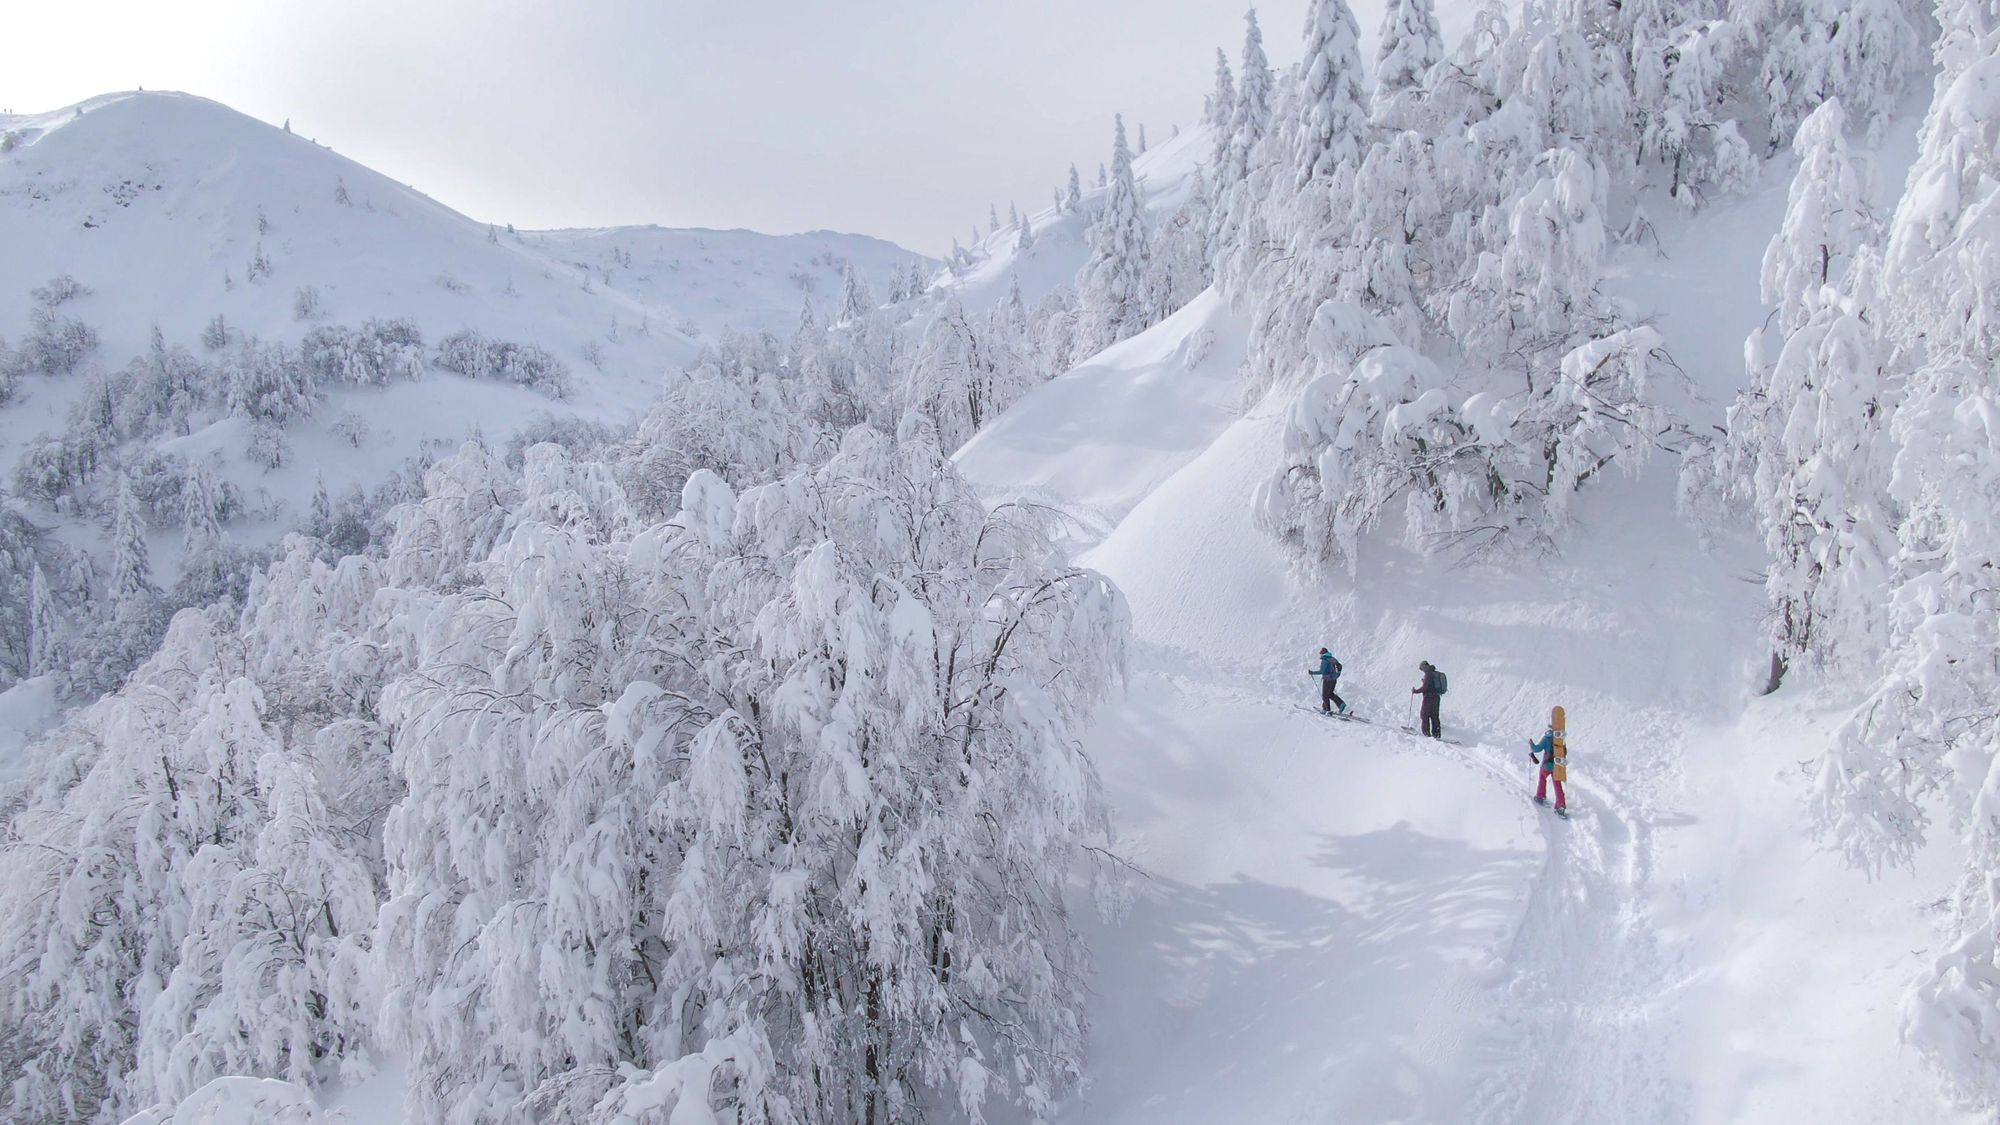 Three backcountry skiers travelling through a snowy forest.